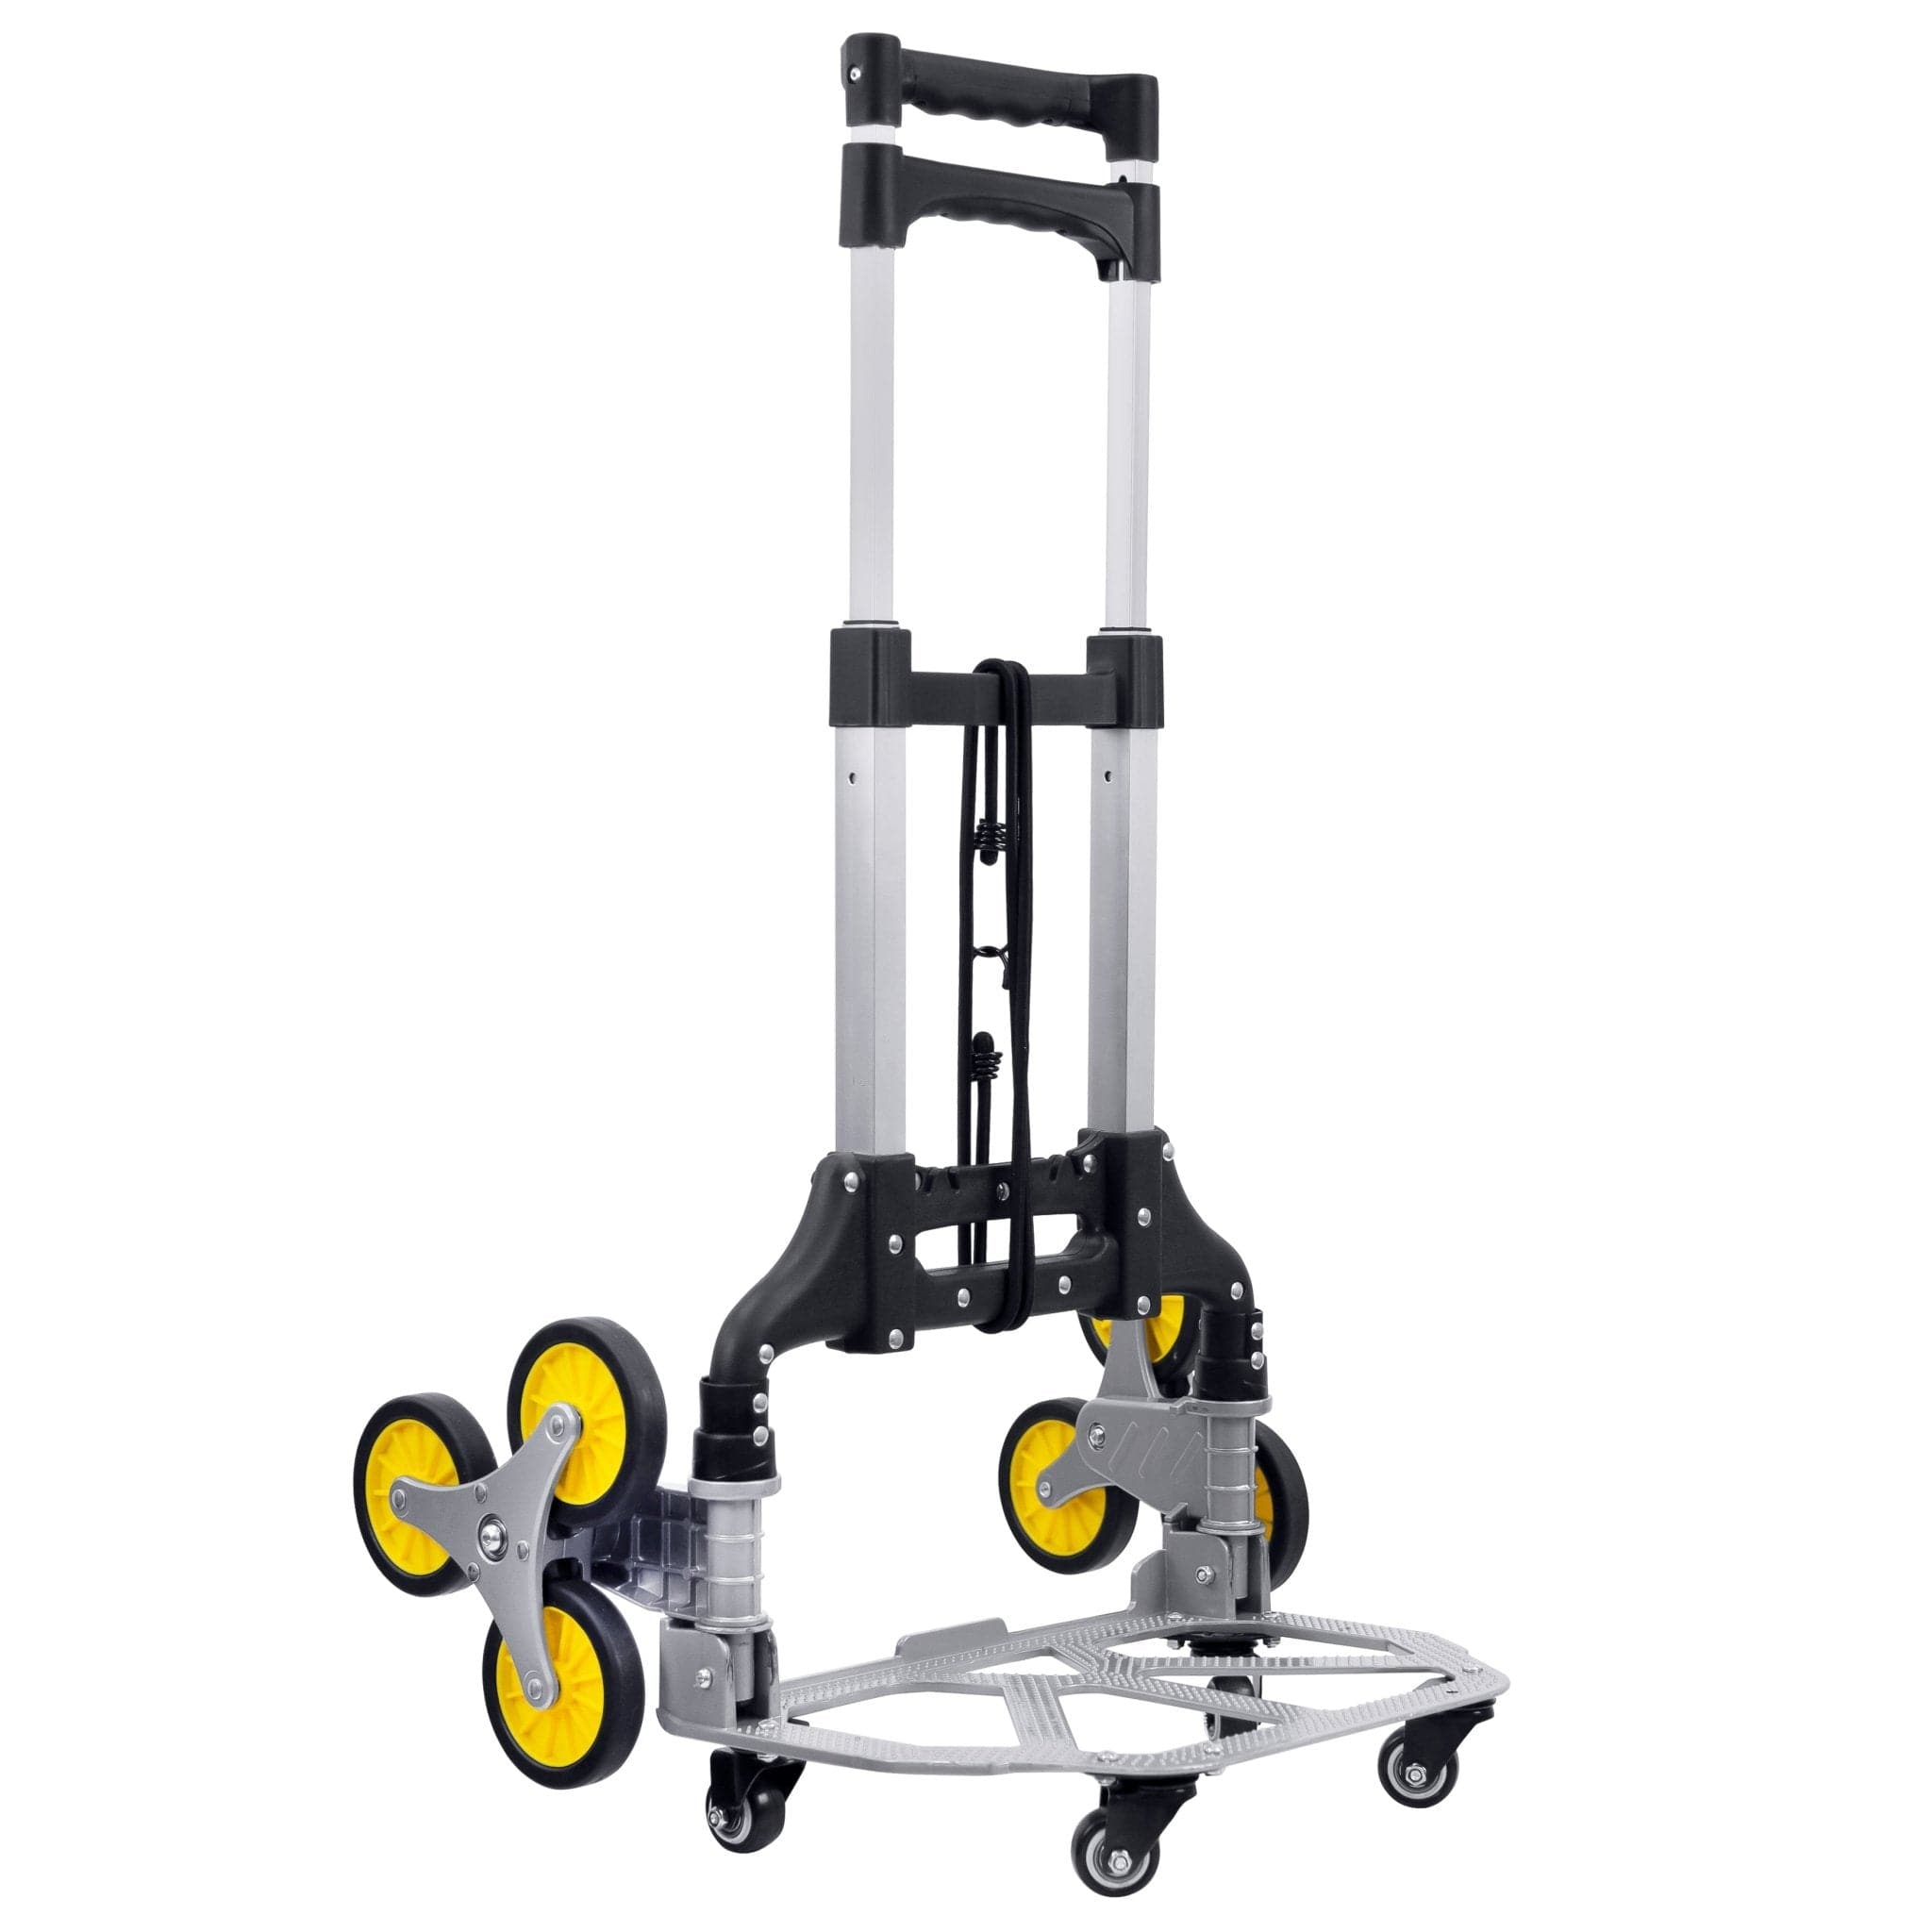 Tri-Wheel Stair Climber Hand Truck with Foldable Design - Mount-It!